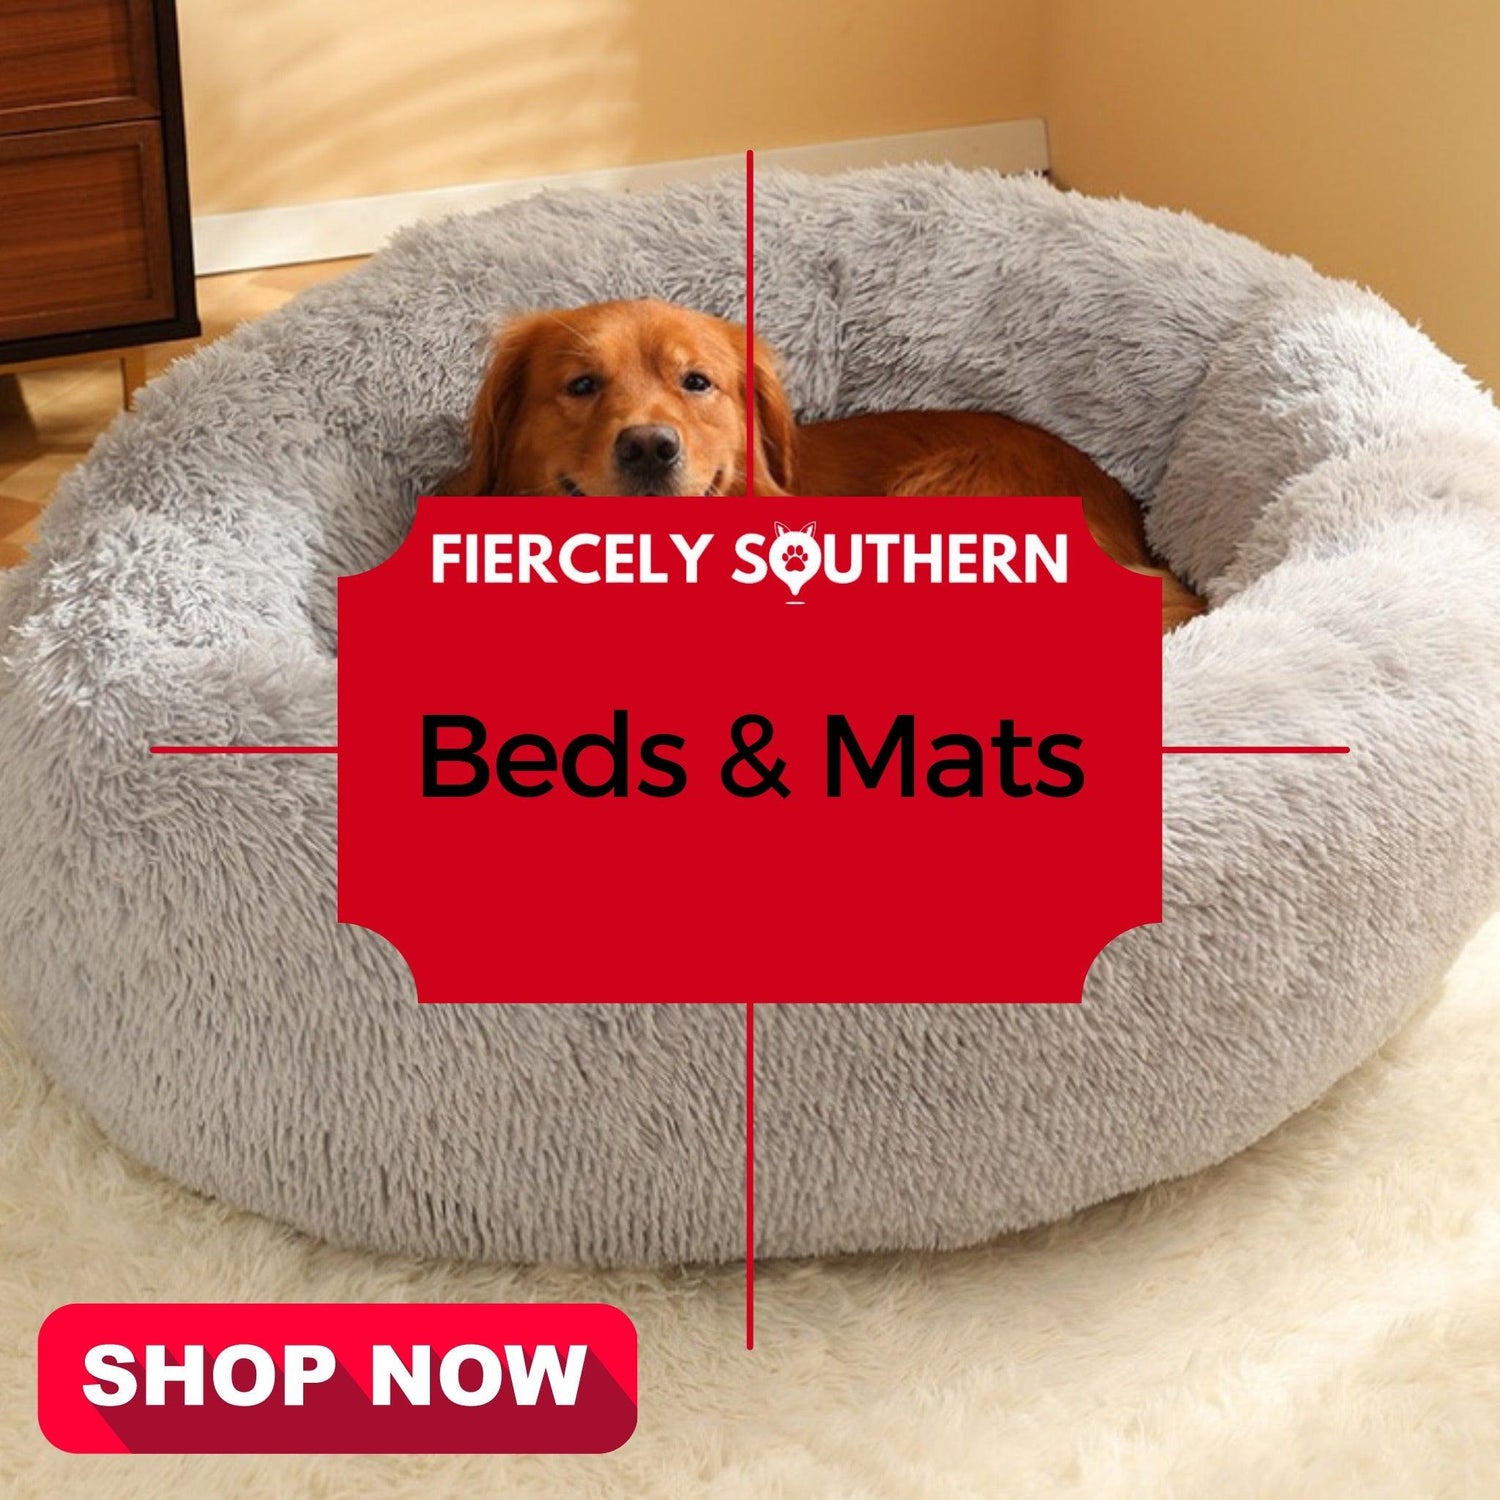 Beds & Mats - Fiercely Southern